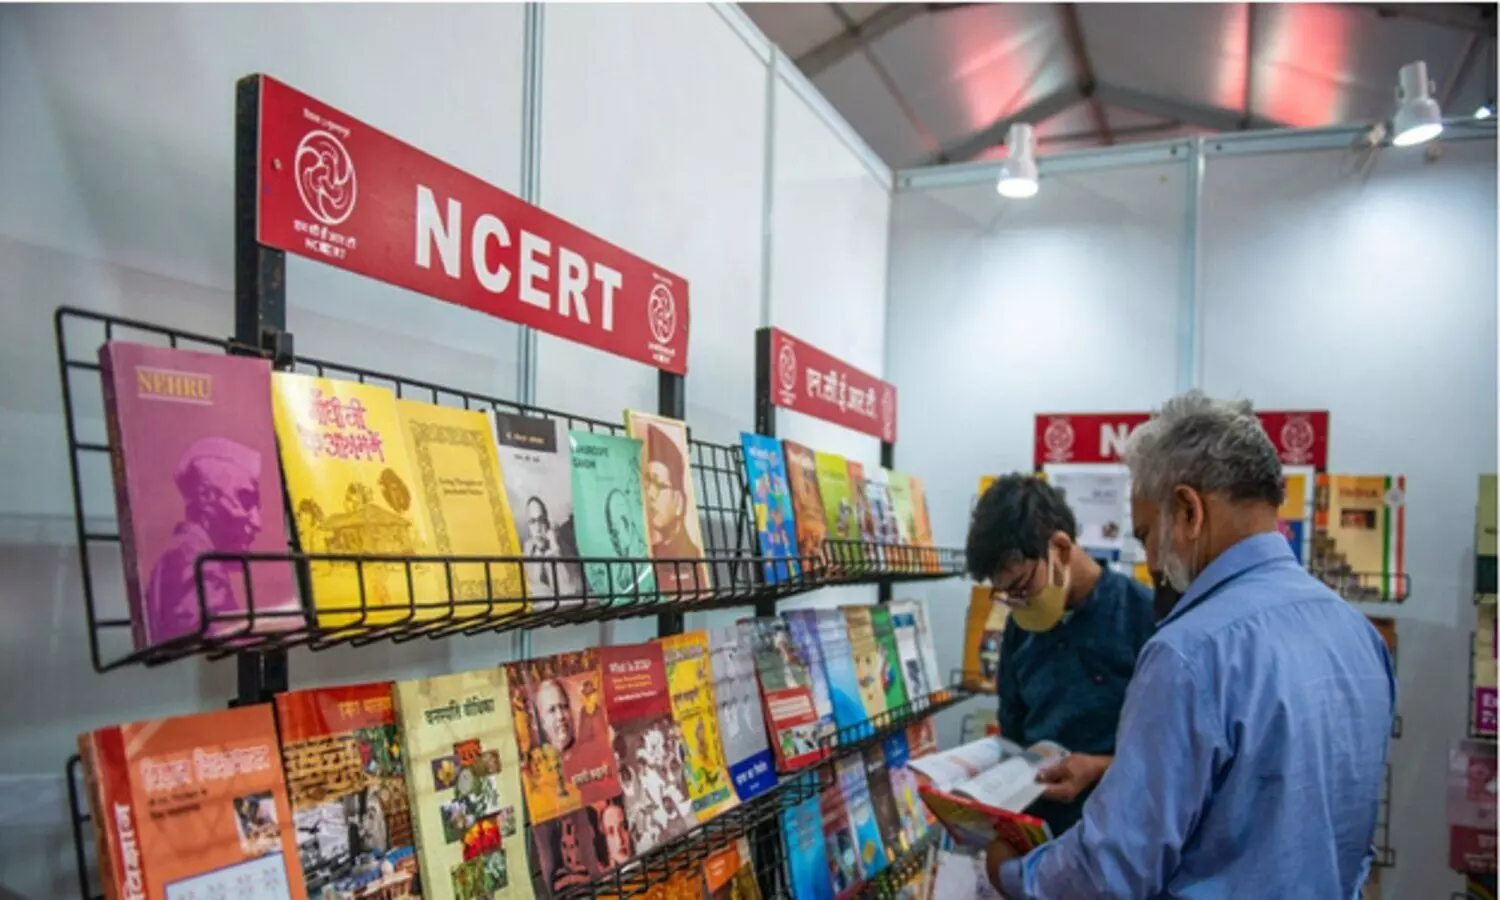 ncert omits climate syllabus